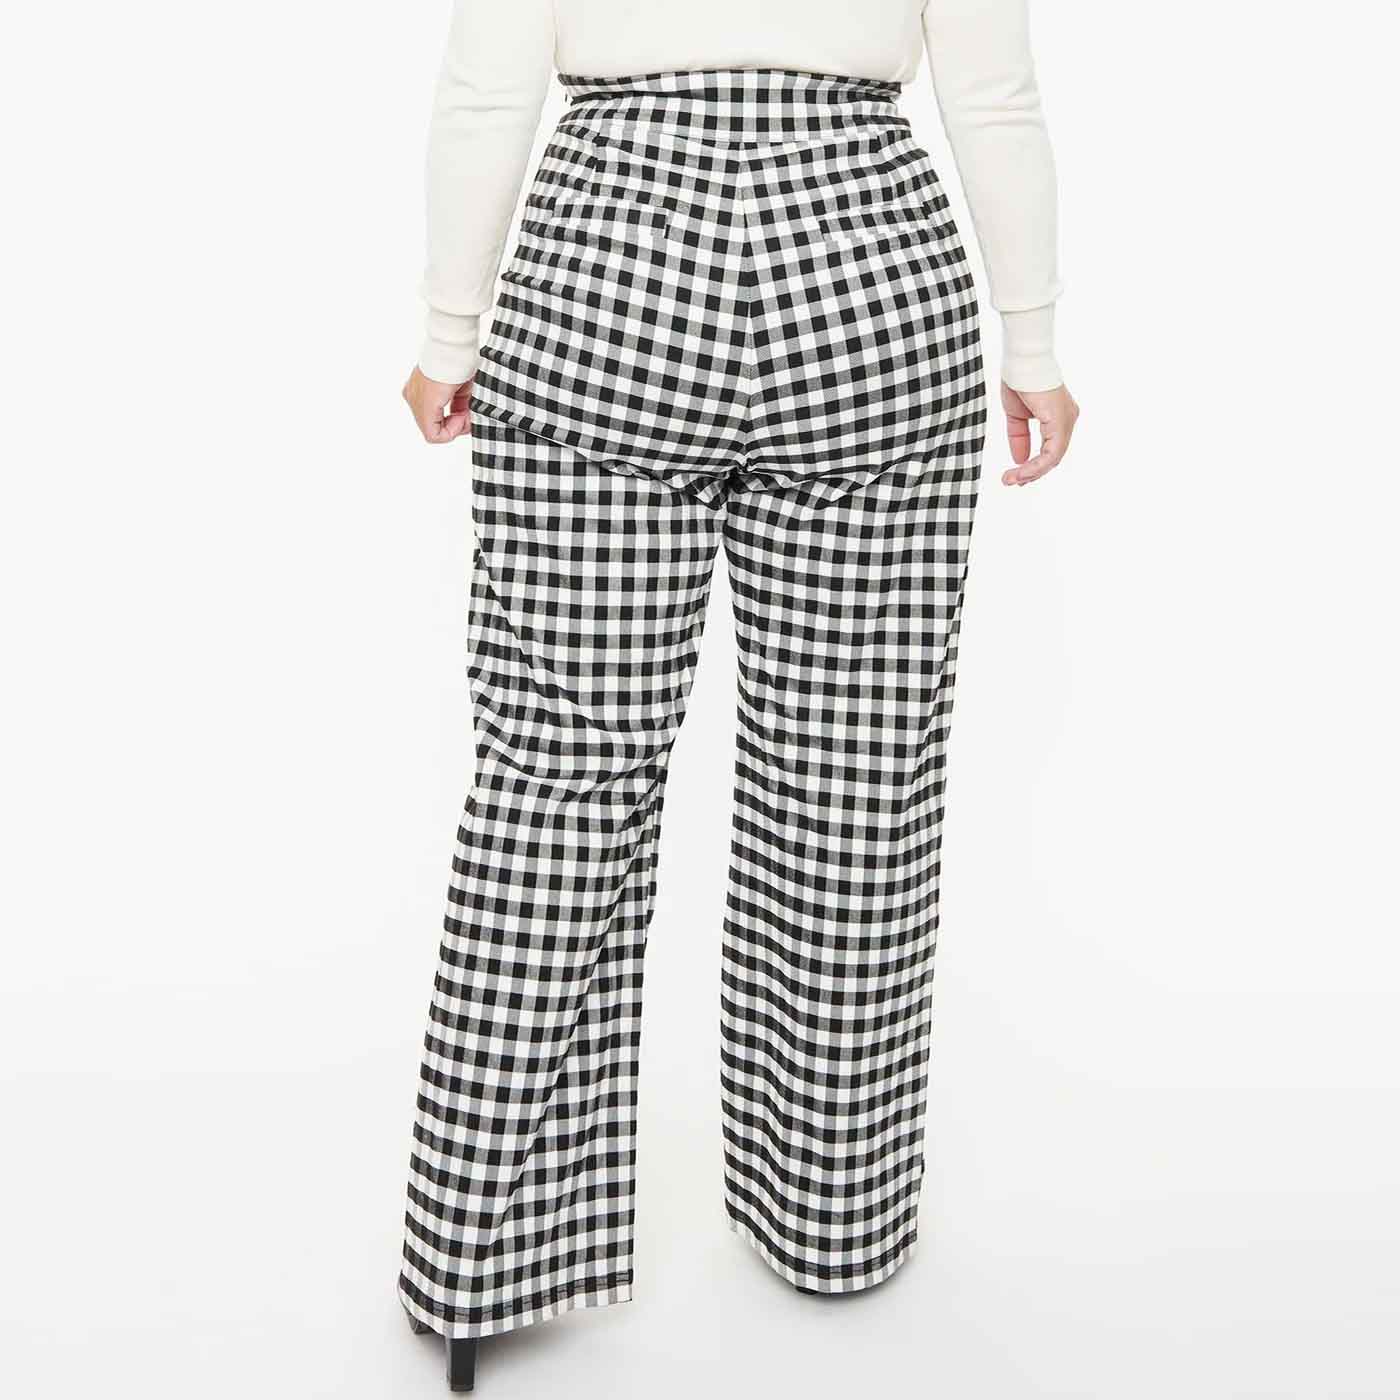 Back view of plus size model wearing black and white gingham 1950s style trousers